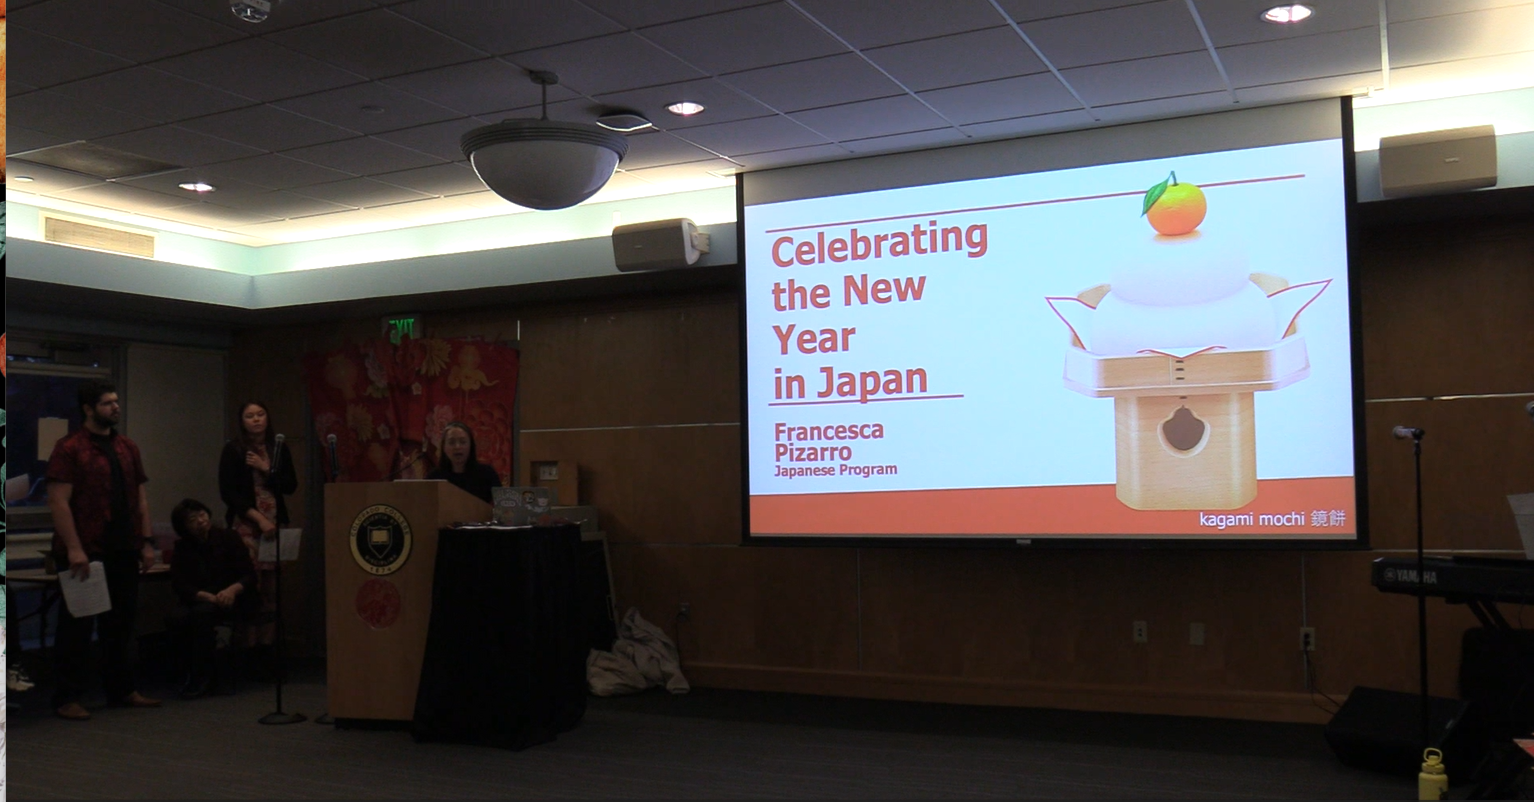 Introduction to Japanese New Year: Professor Francesca Pizarro <span class="cc-gallery-credit"></span>